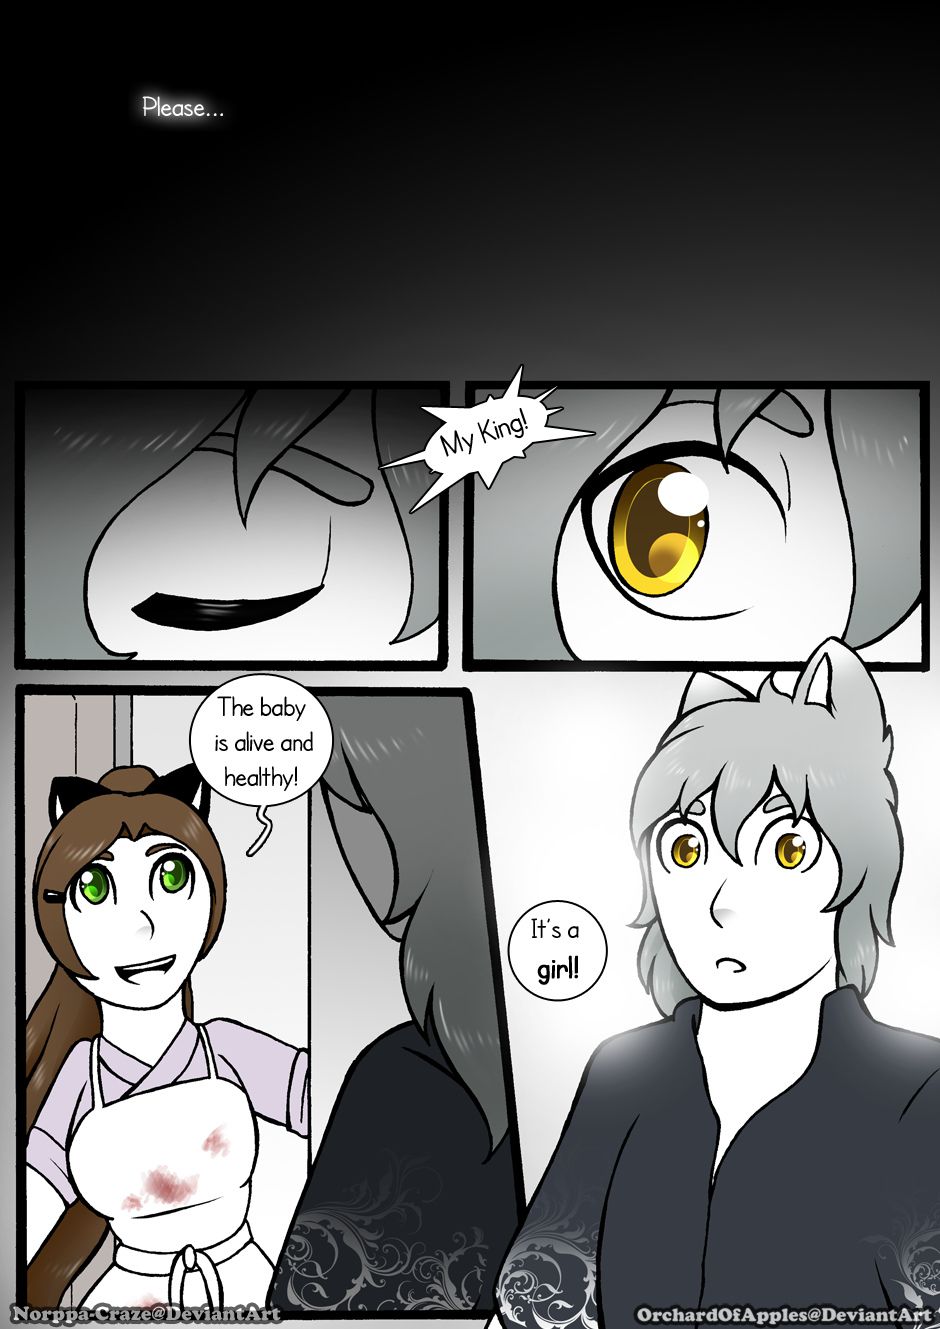 [Jeny-jen94] Between Kings and Queens [Ongoing] 326